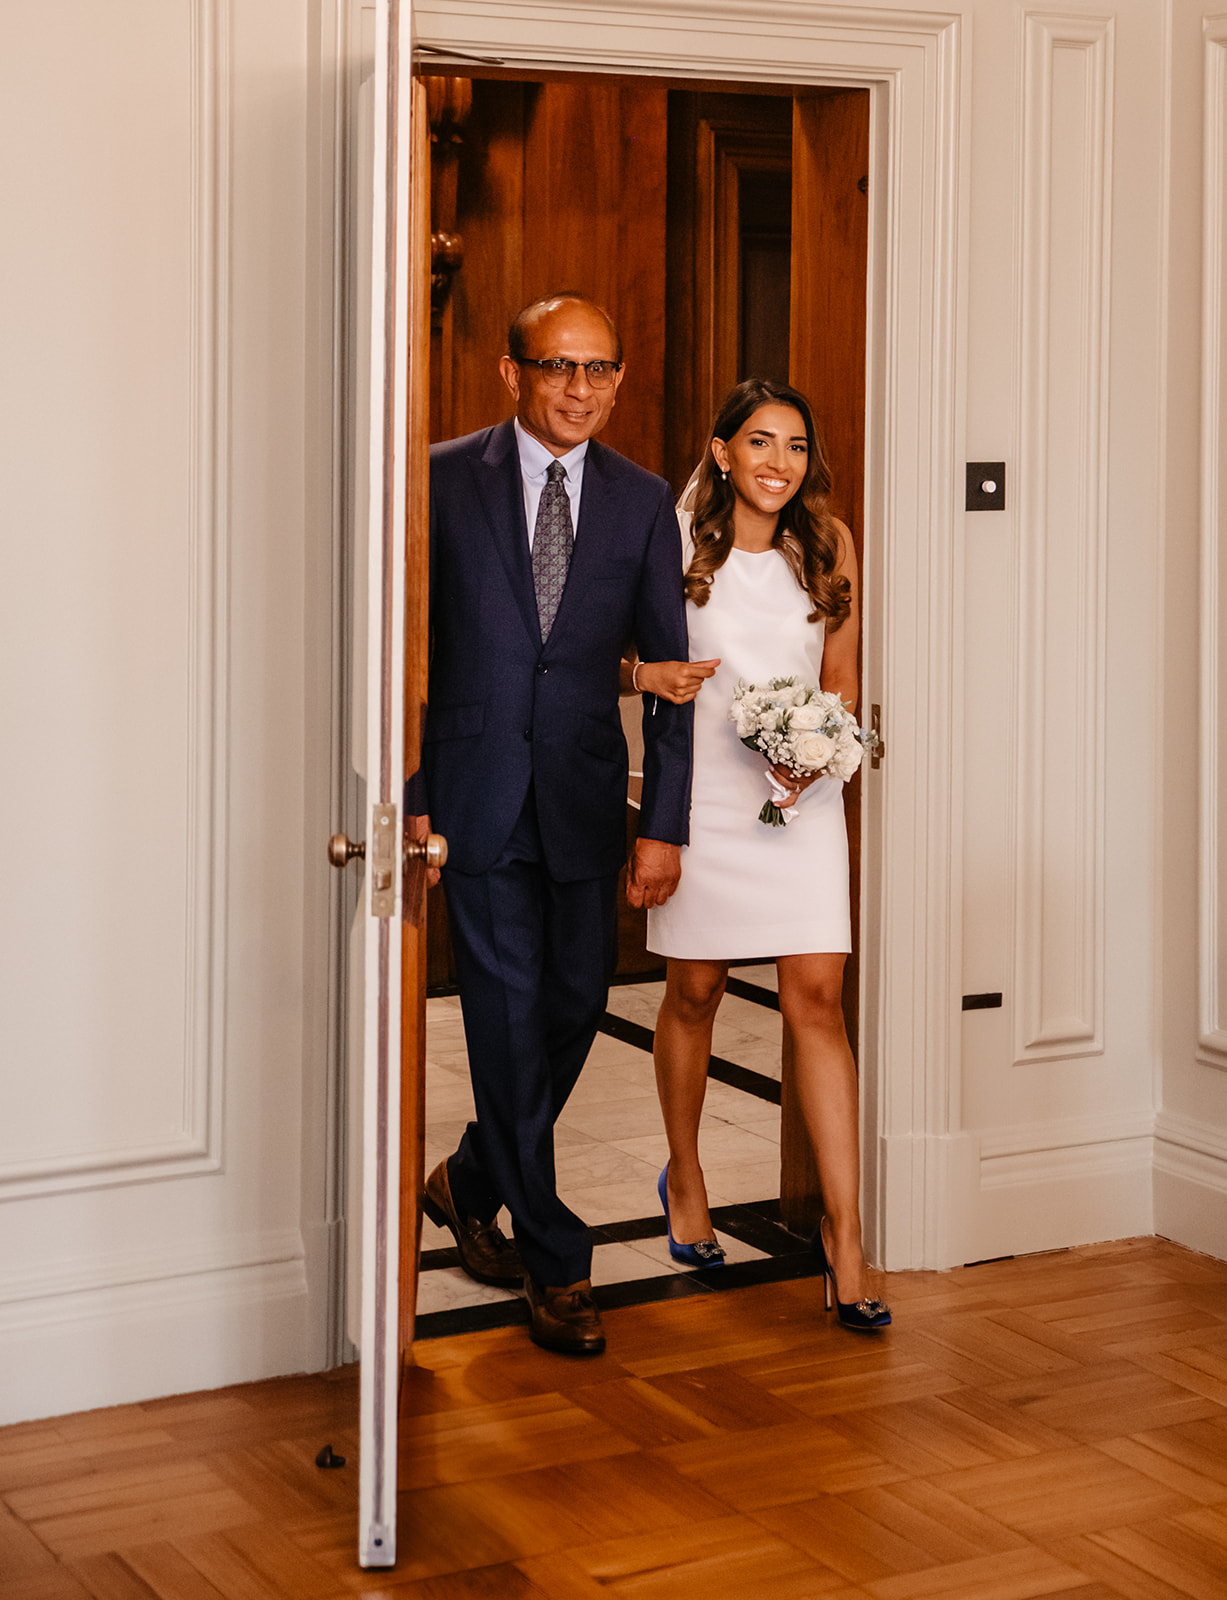 Bride and father entering the wedding Ceremony at Old Marylebone Town Hall in London